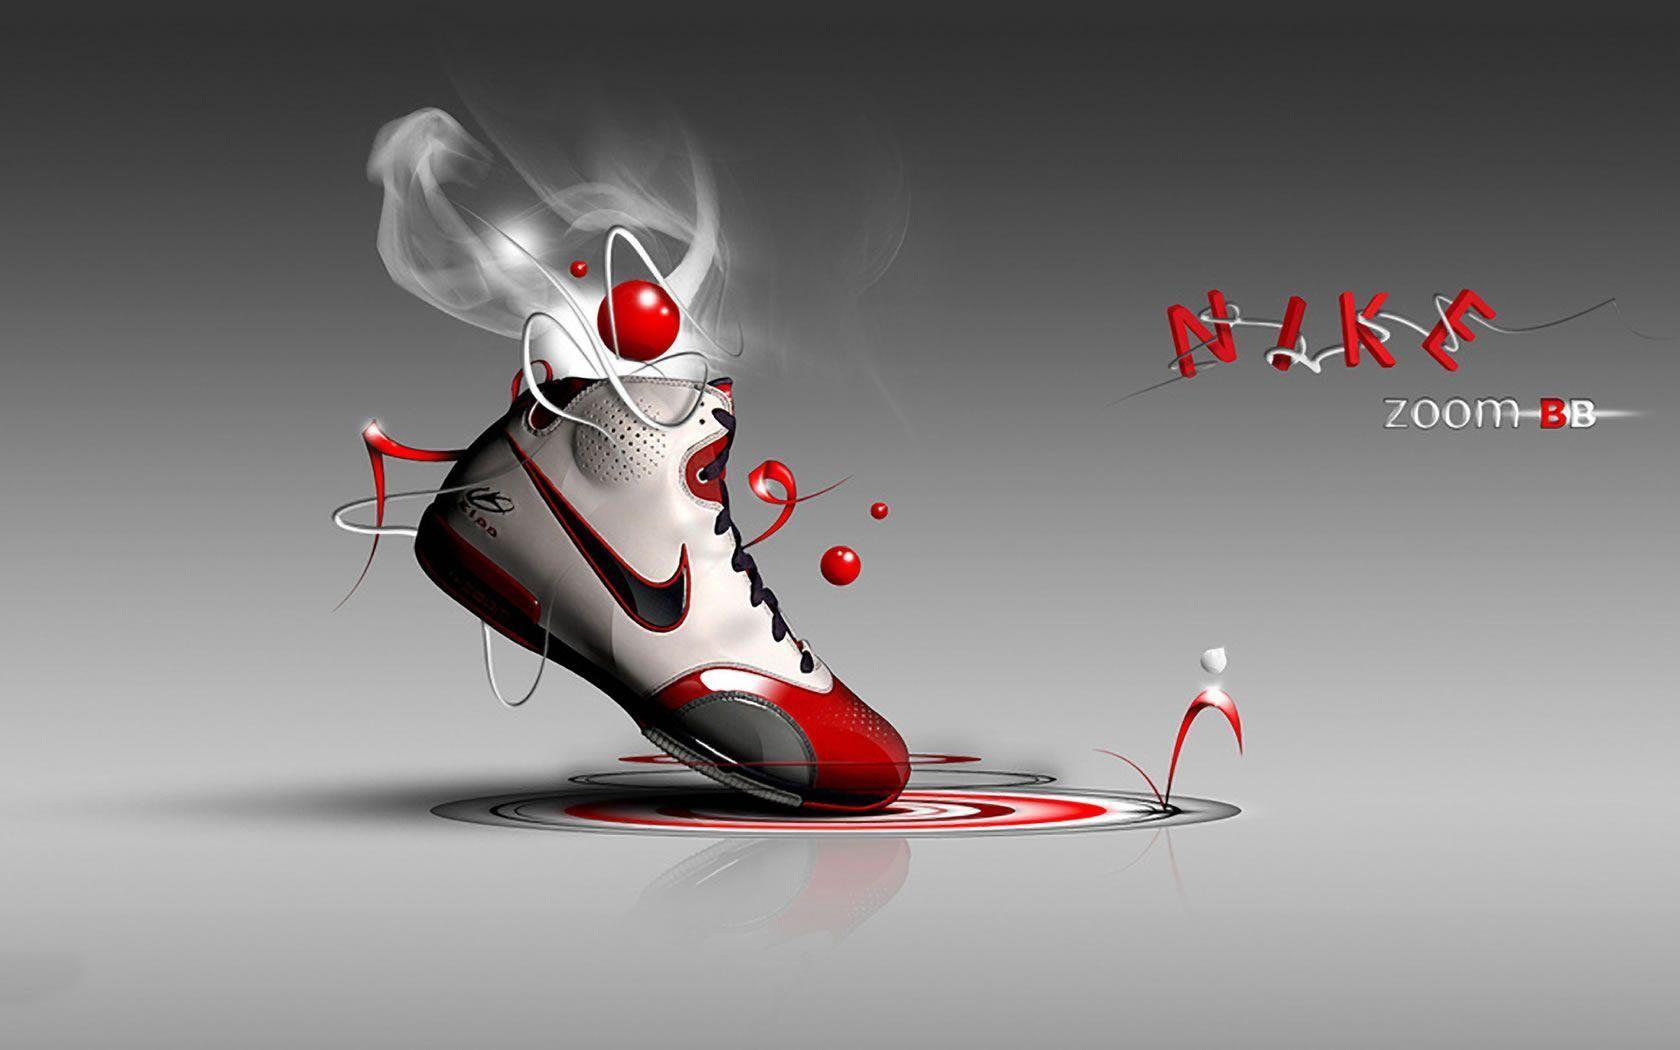 Nike Zoom Bb Hd Wallpapers For Fullscreen And Widescreen